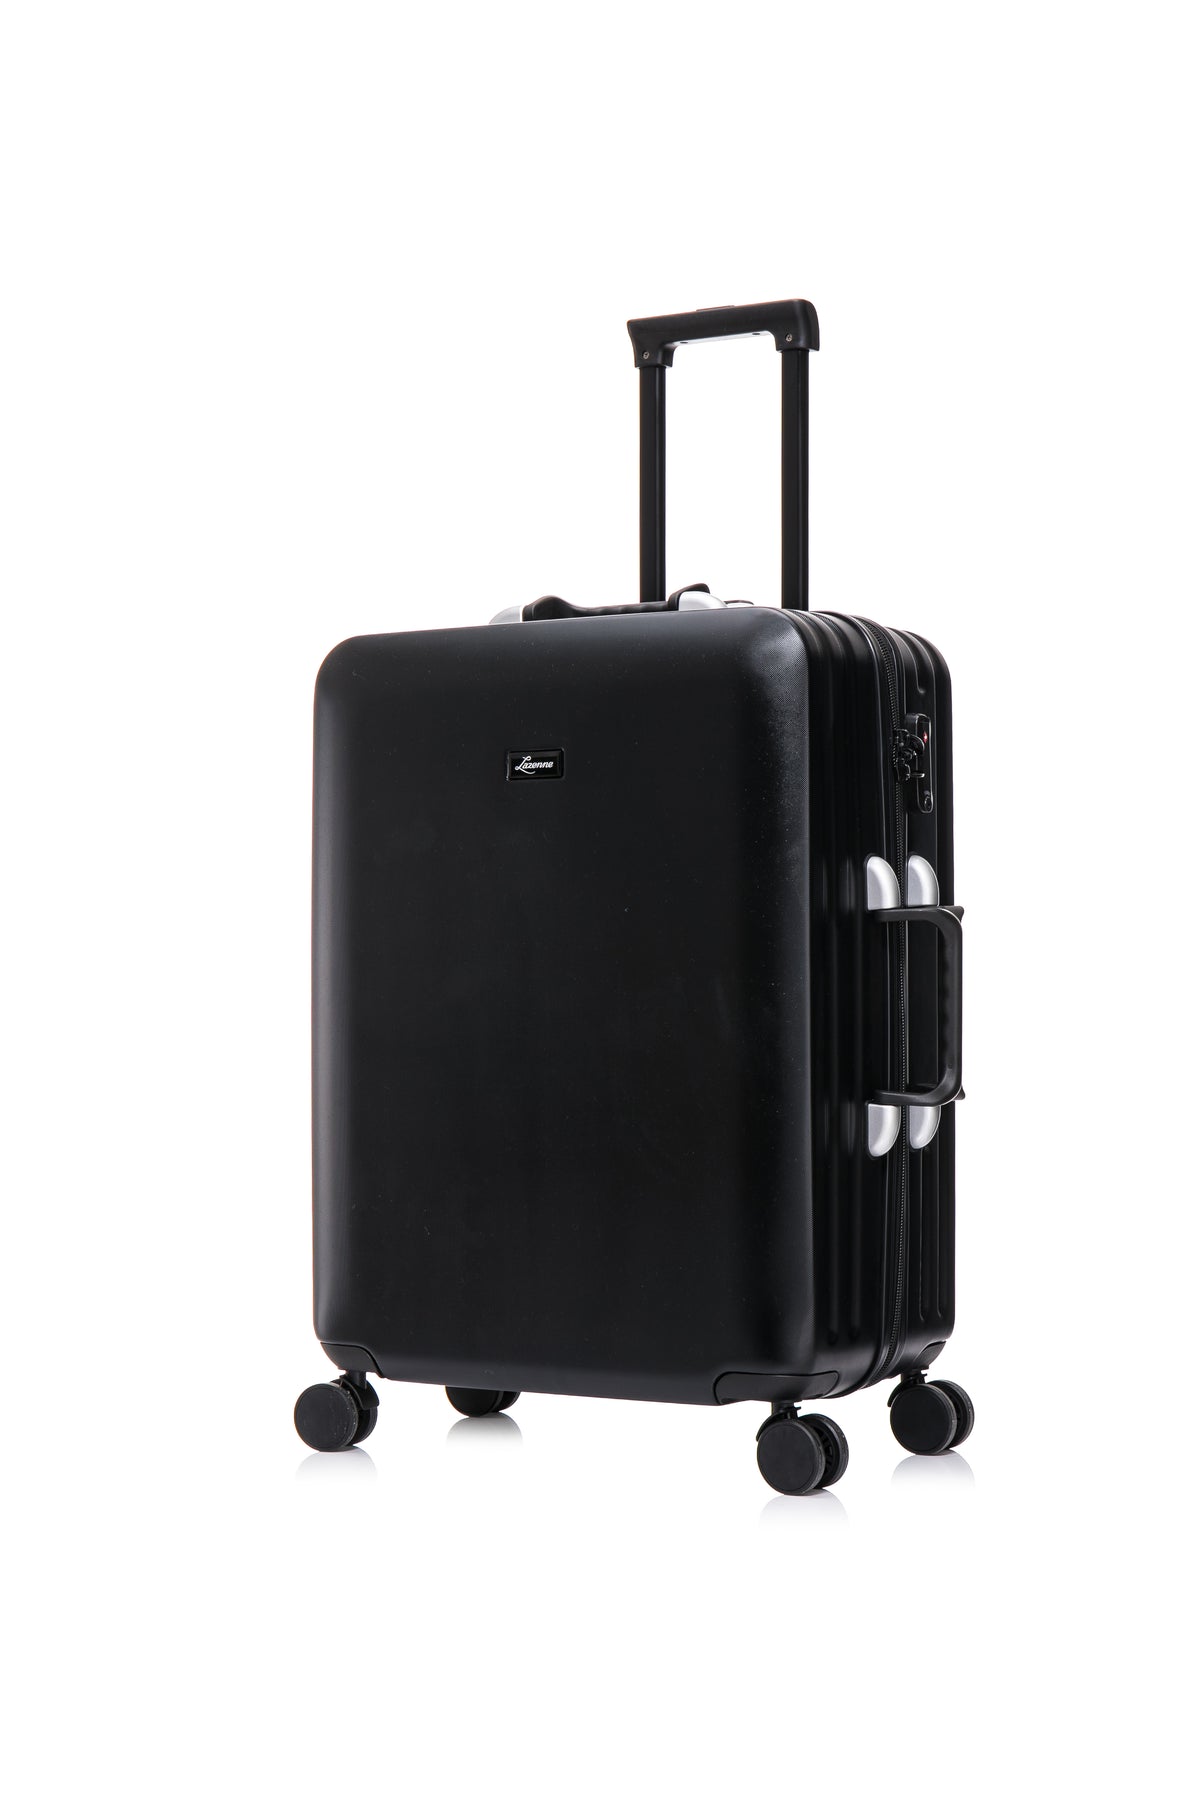 NEW!!! The Lazenne Wine Travel Suitcase for 12 bottles or 6 bottles + a mix of clothes